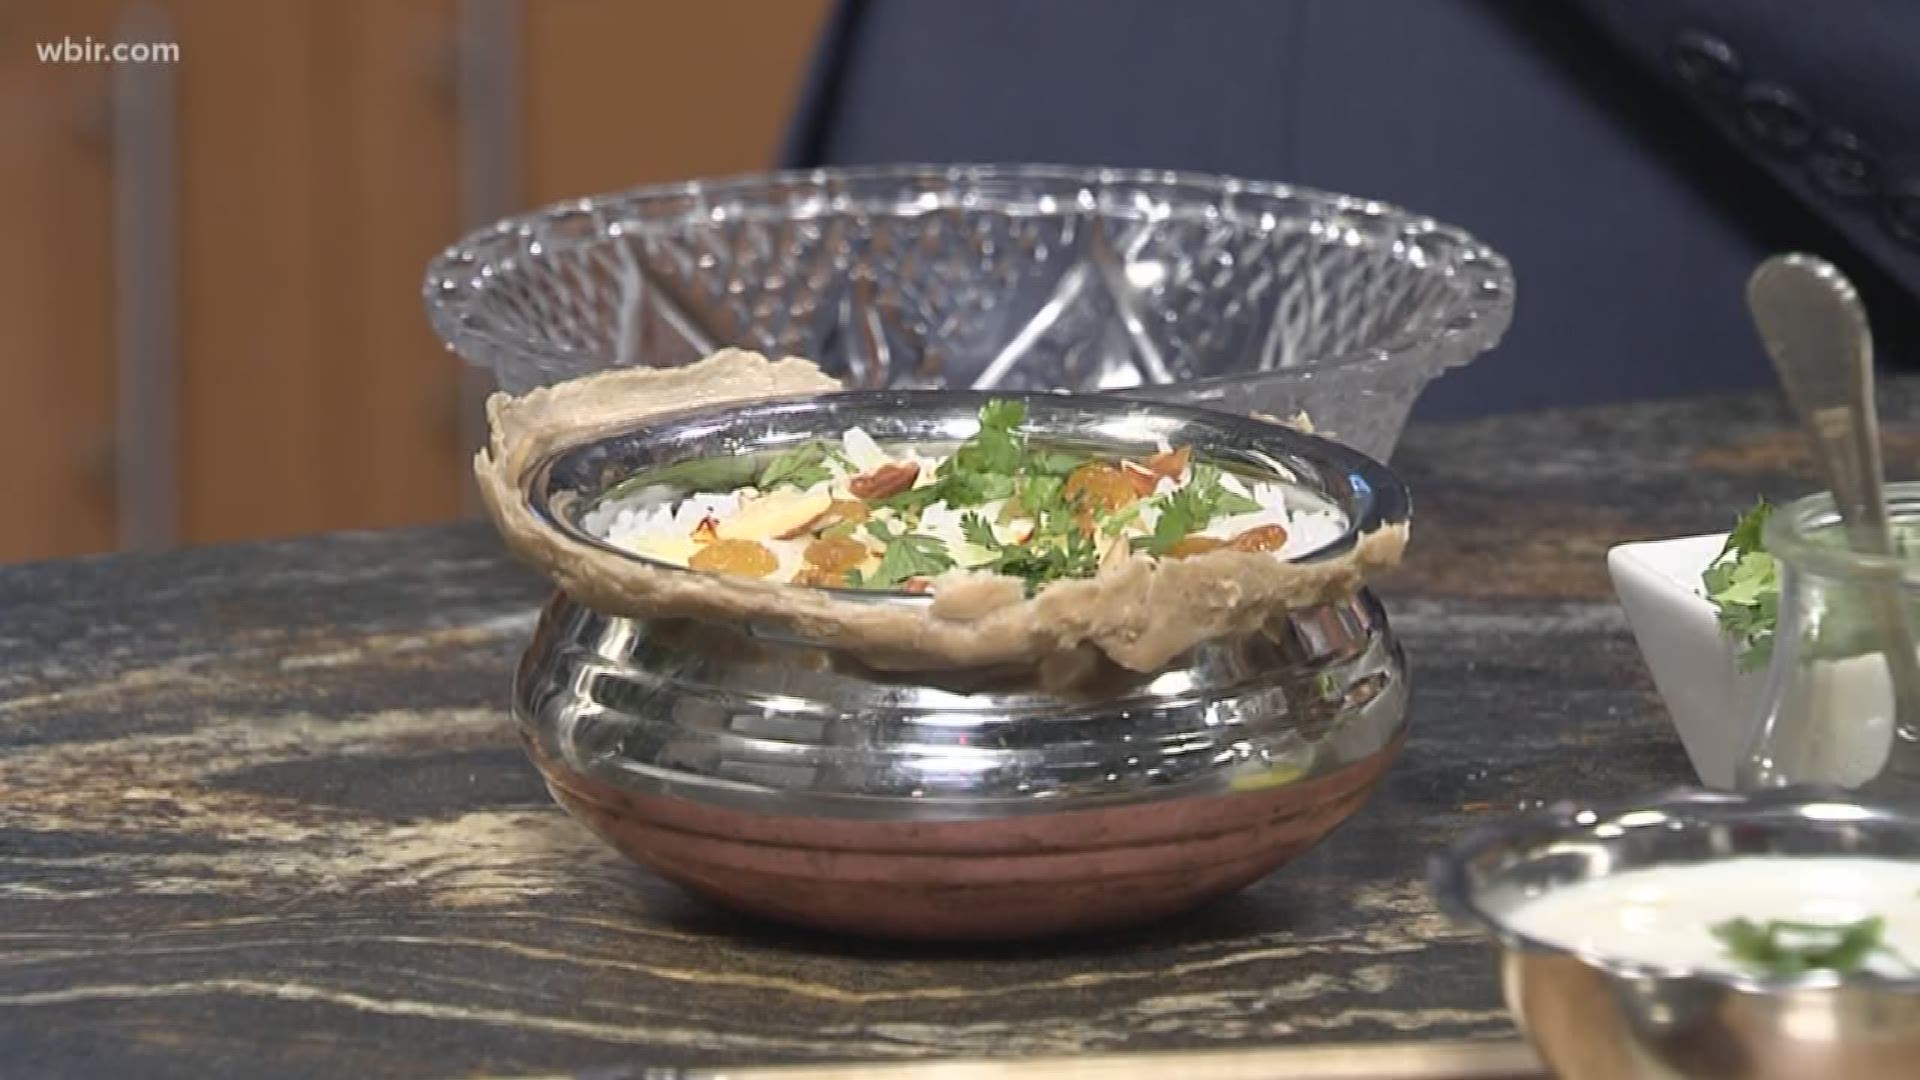 Smita Borole is in the kitchen cooking up a traditional Indian family recipe